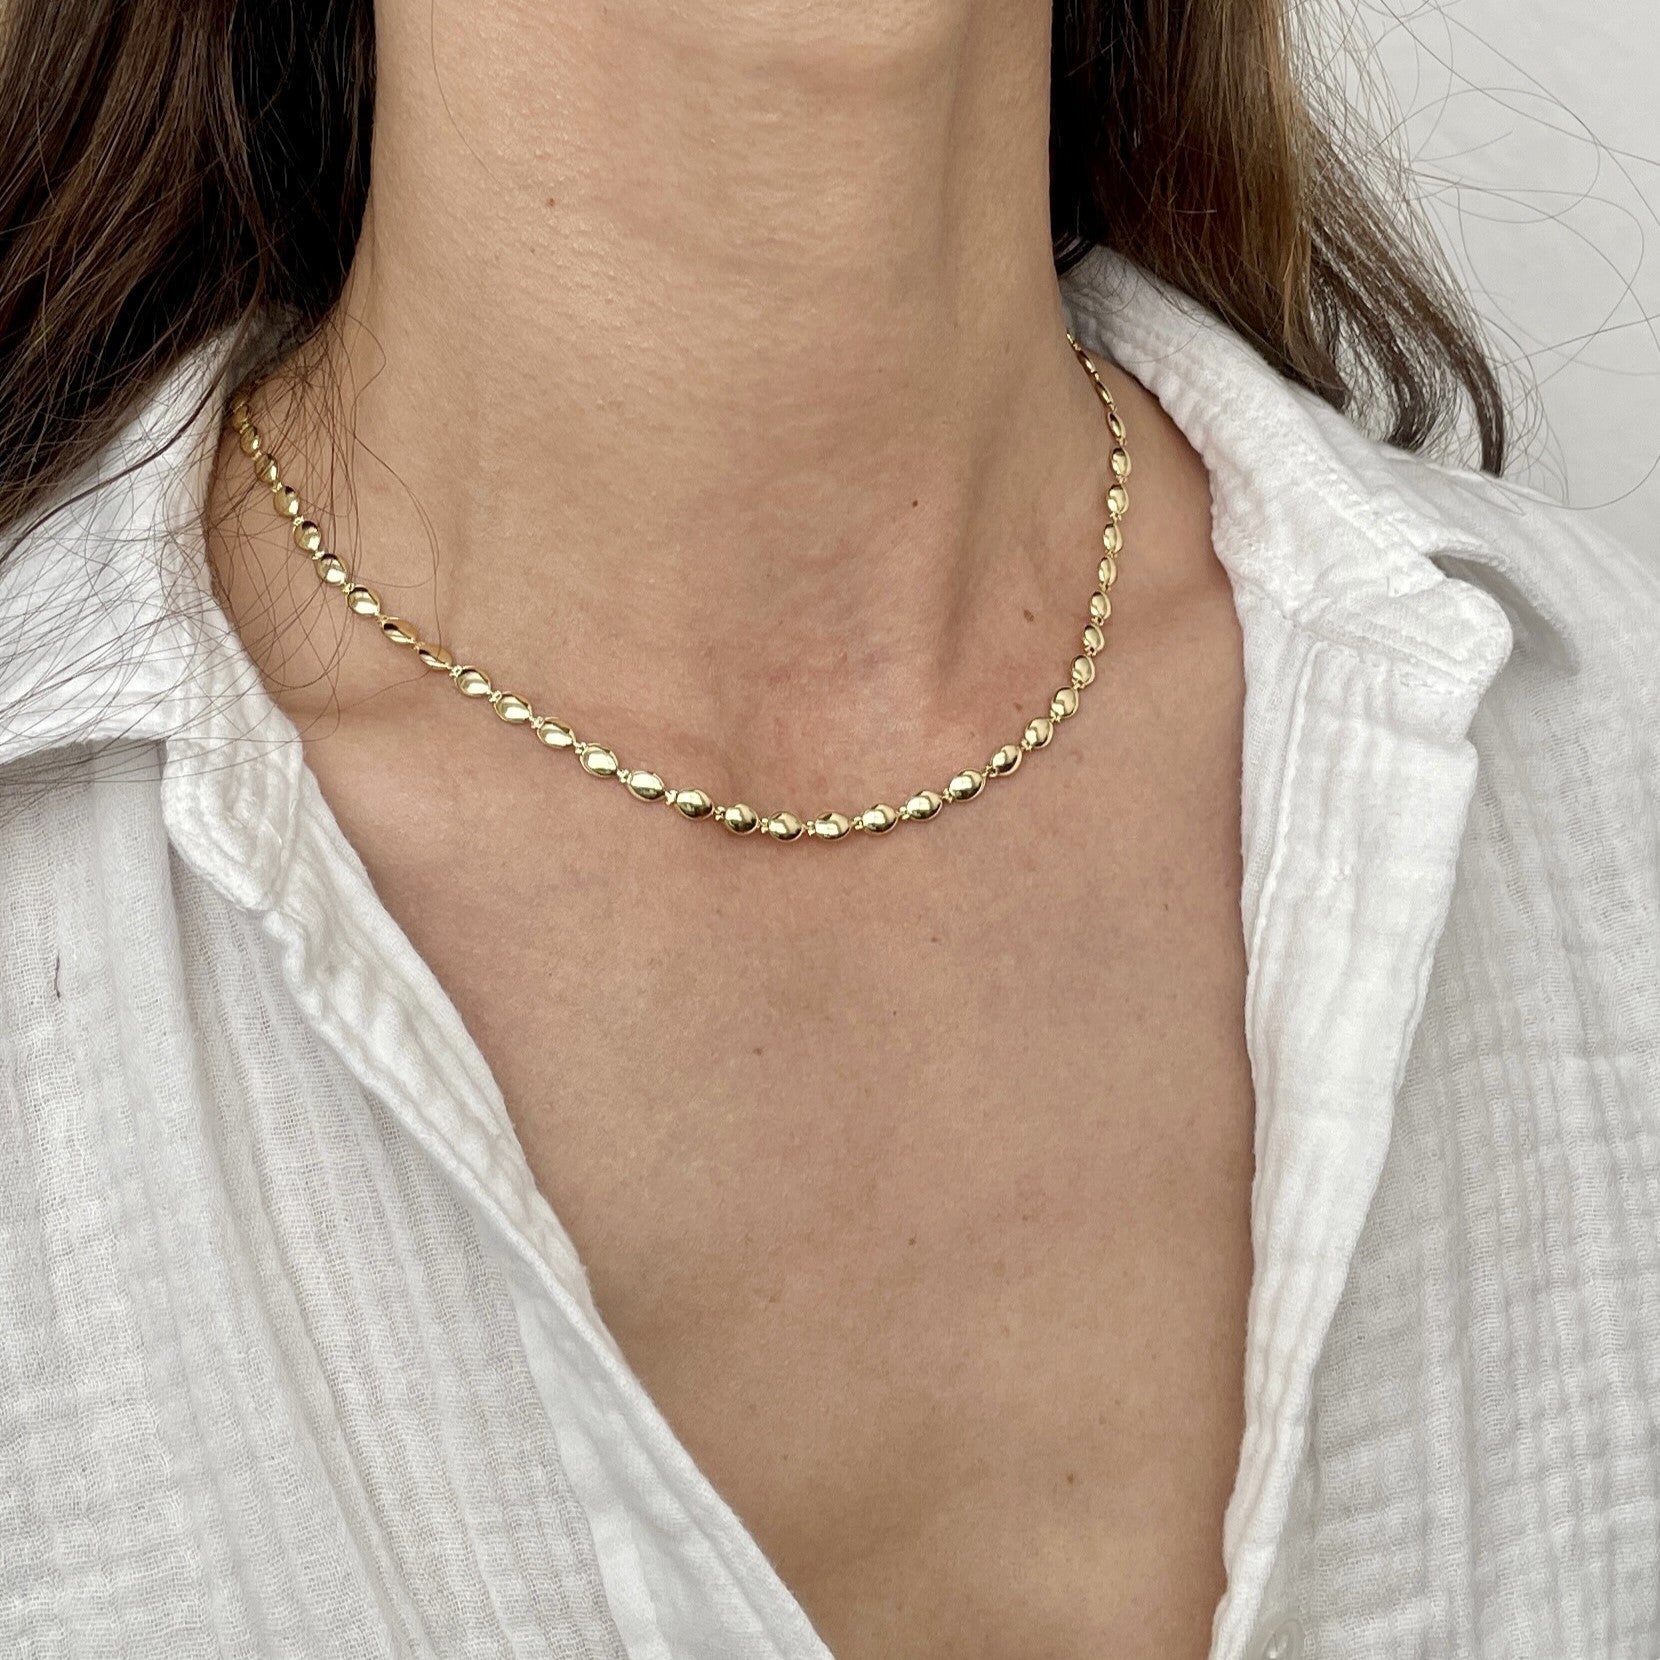 14k Gold Pebble Bead Necklace Chain